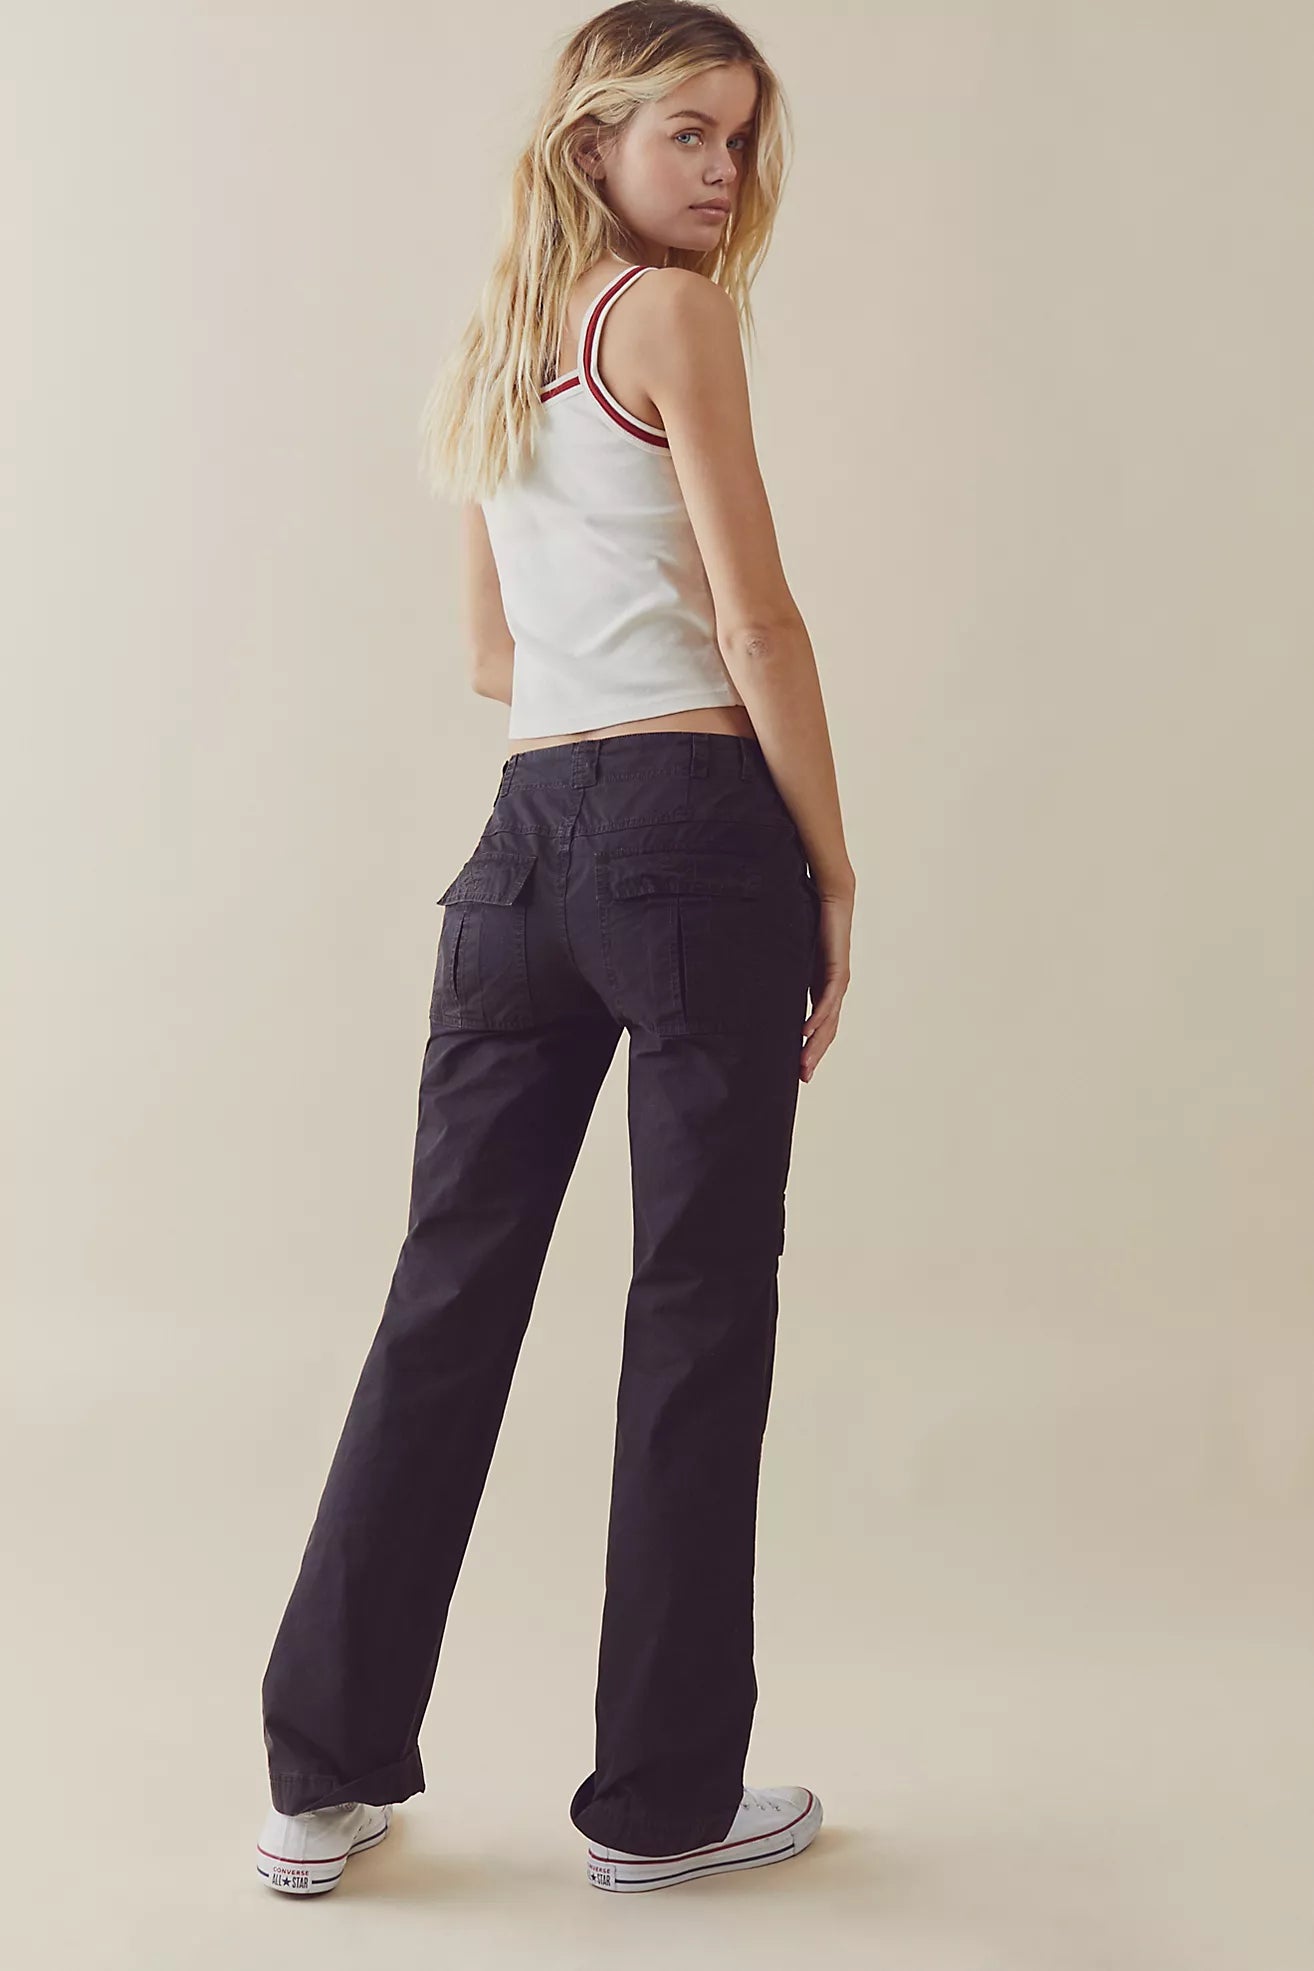 THE THING IS LOW-RISE UTILITY PANTS | FREE PEOPLE